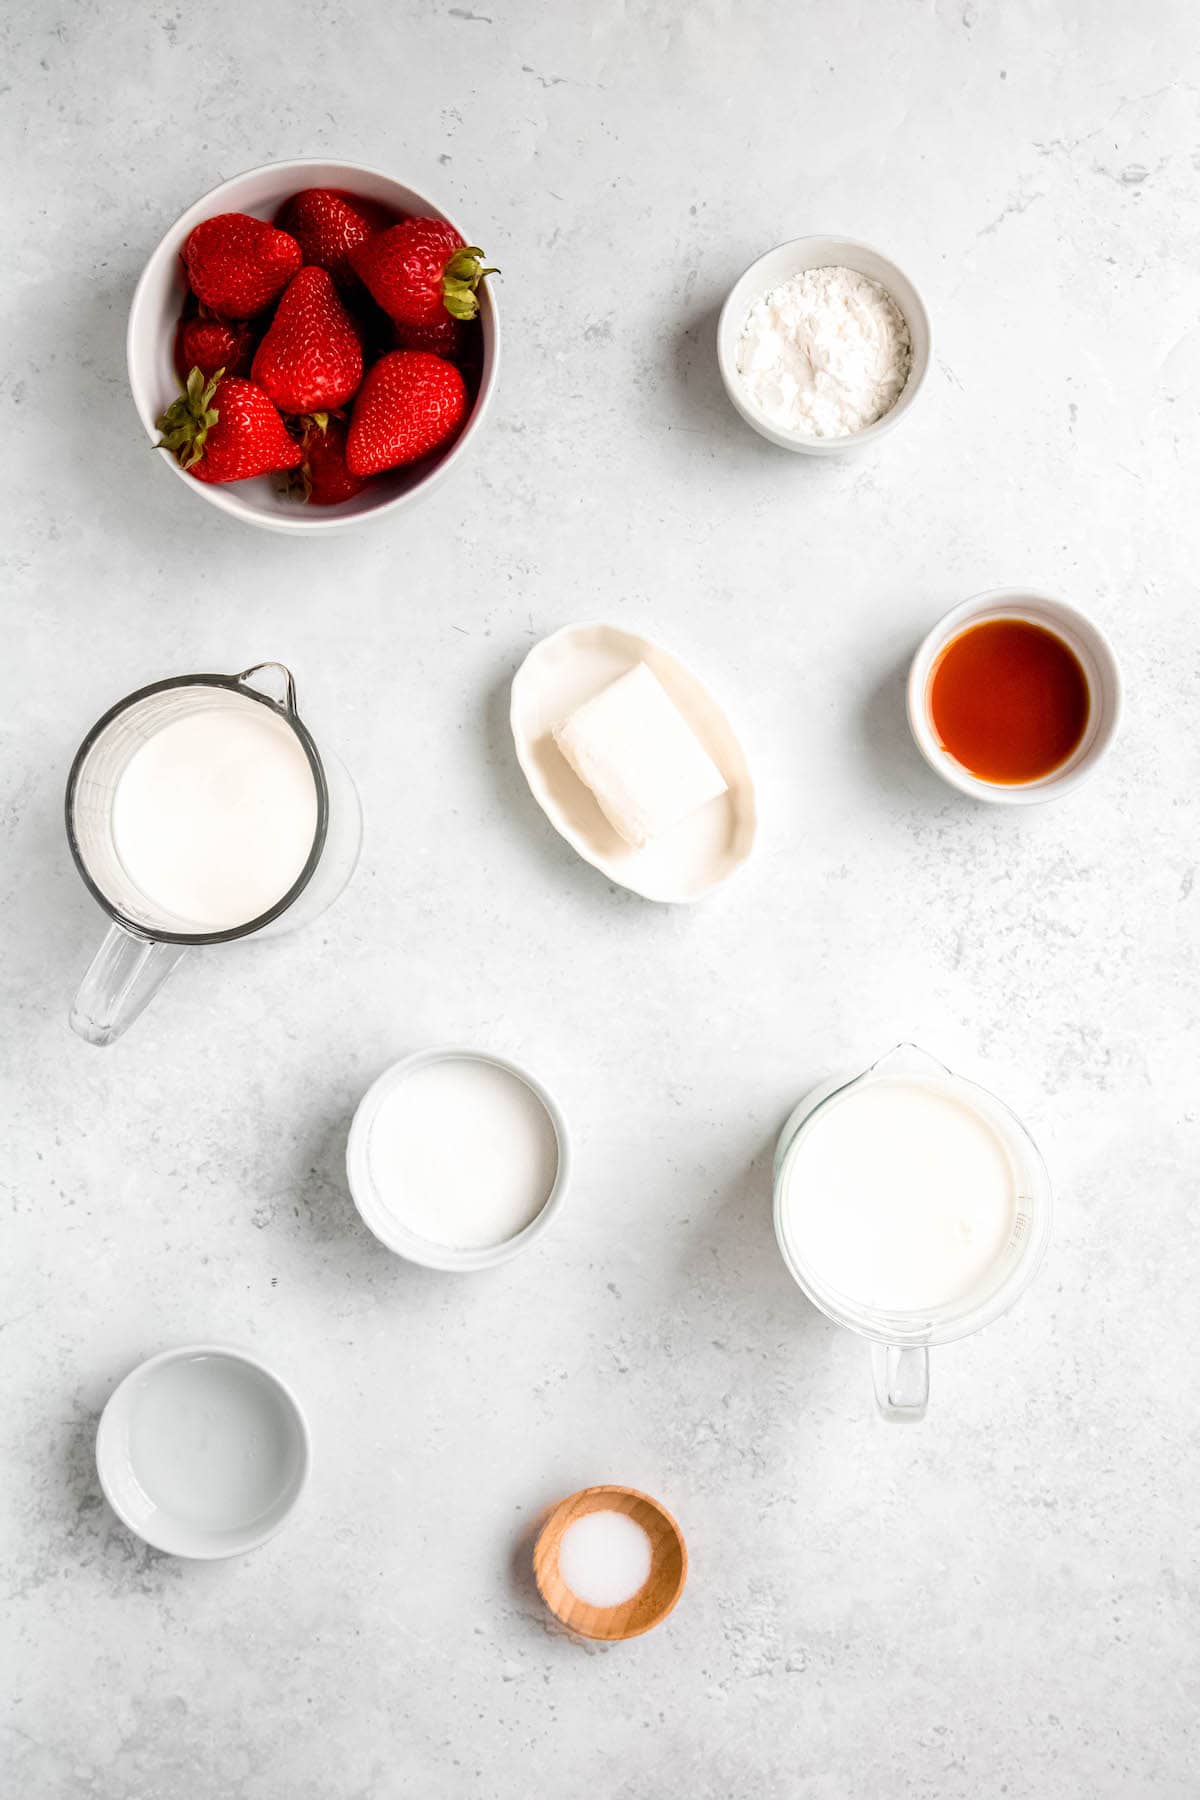 ingredients needed to make homemade strawberry swirl ice cream laid out on a white table.